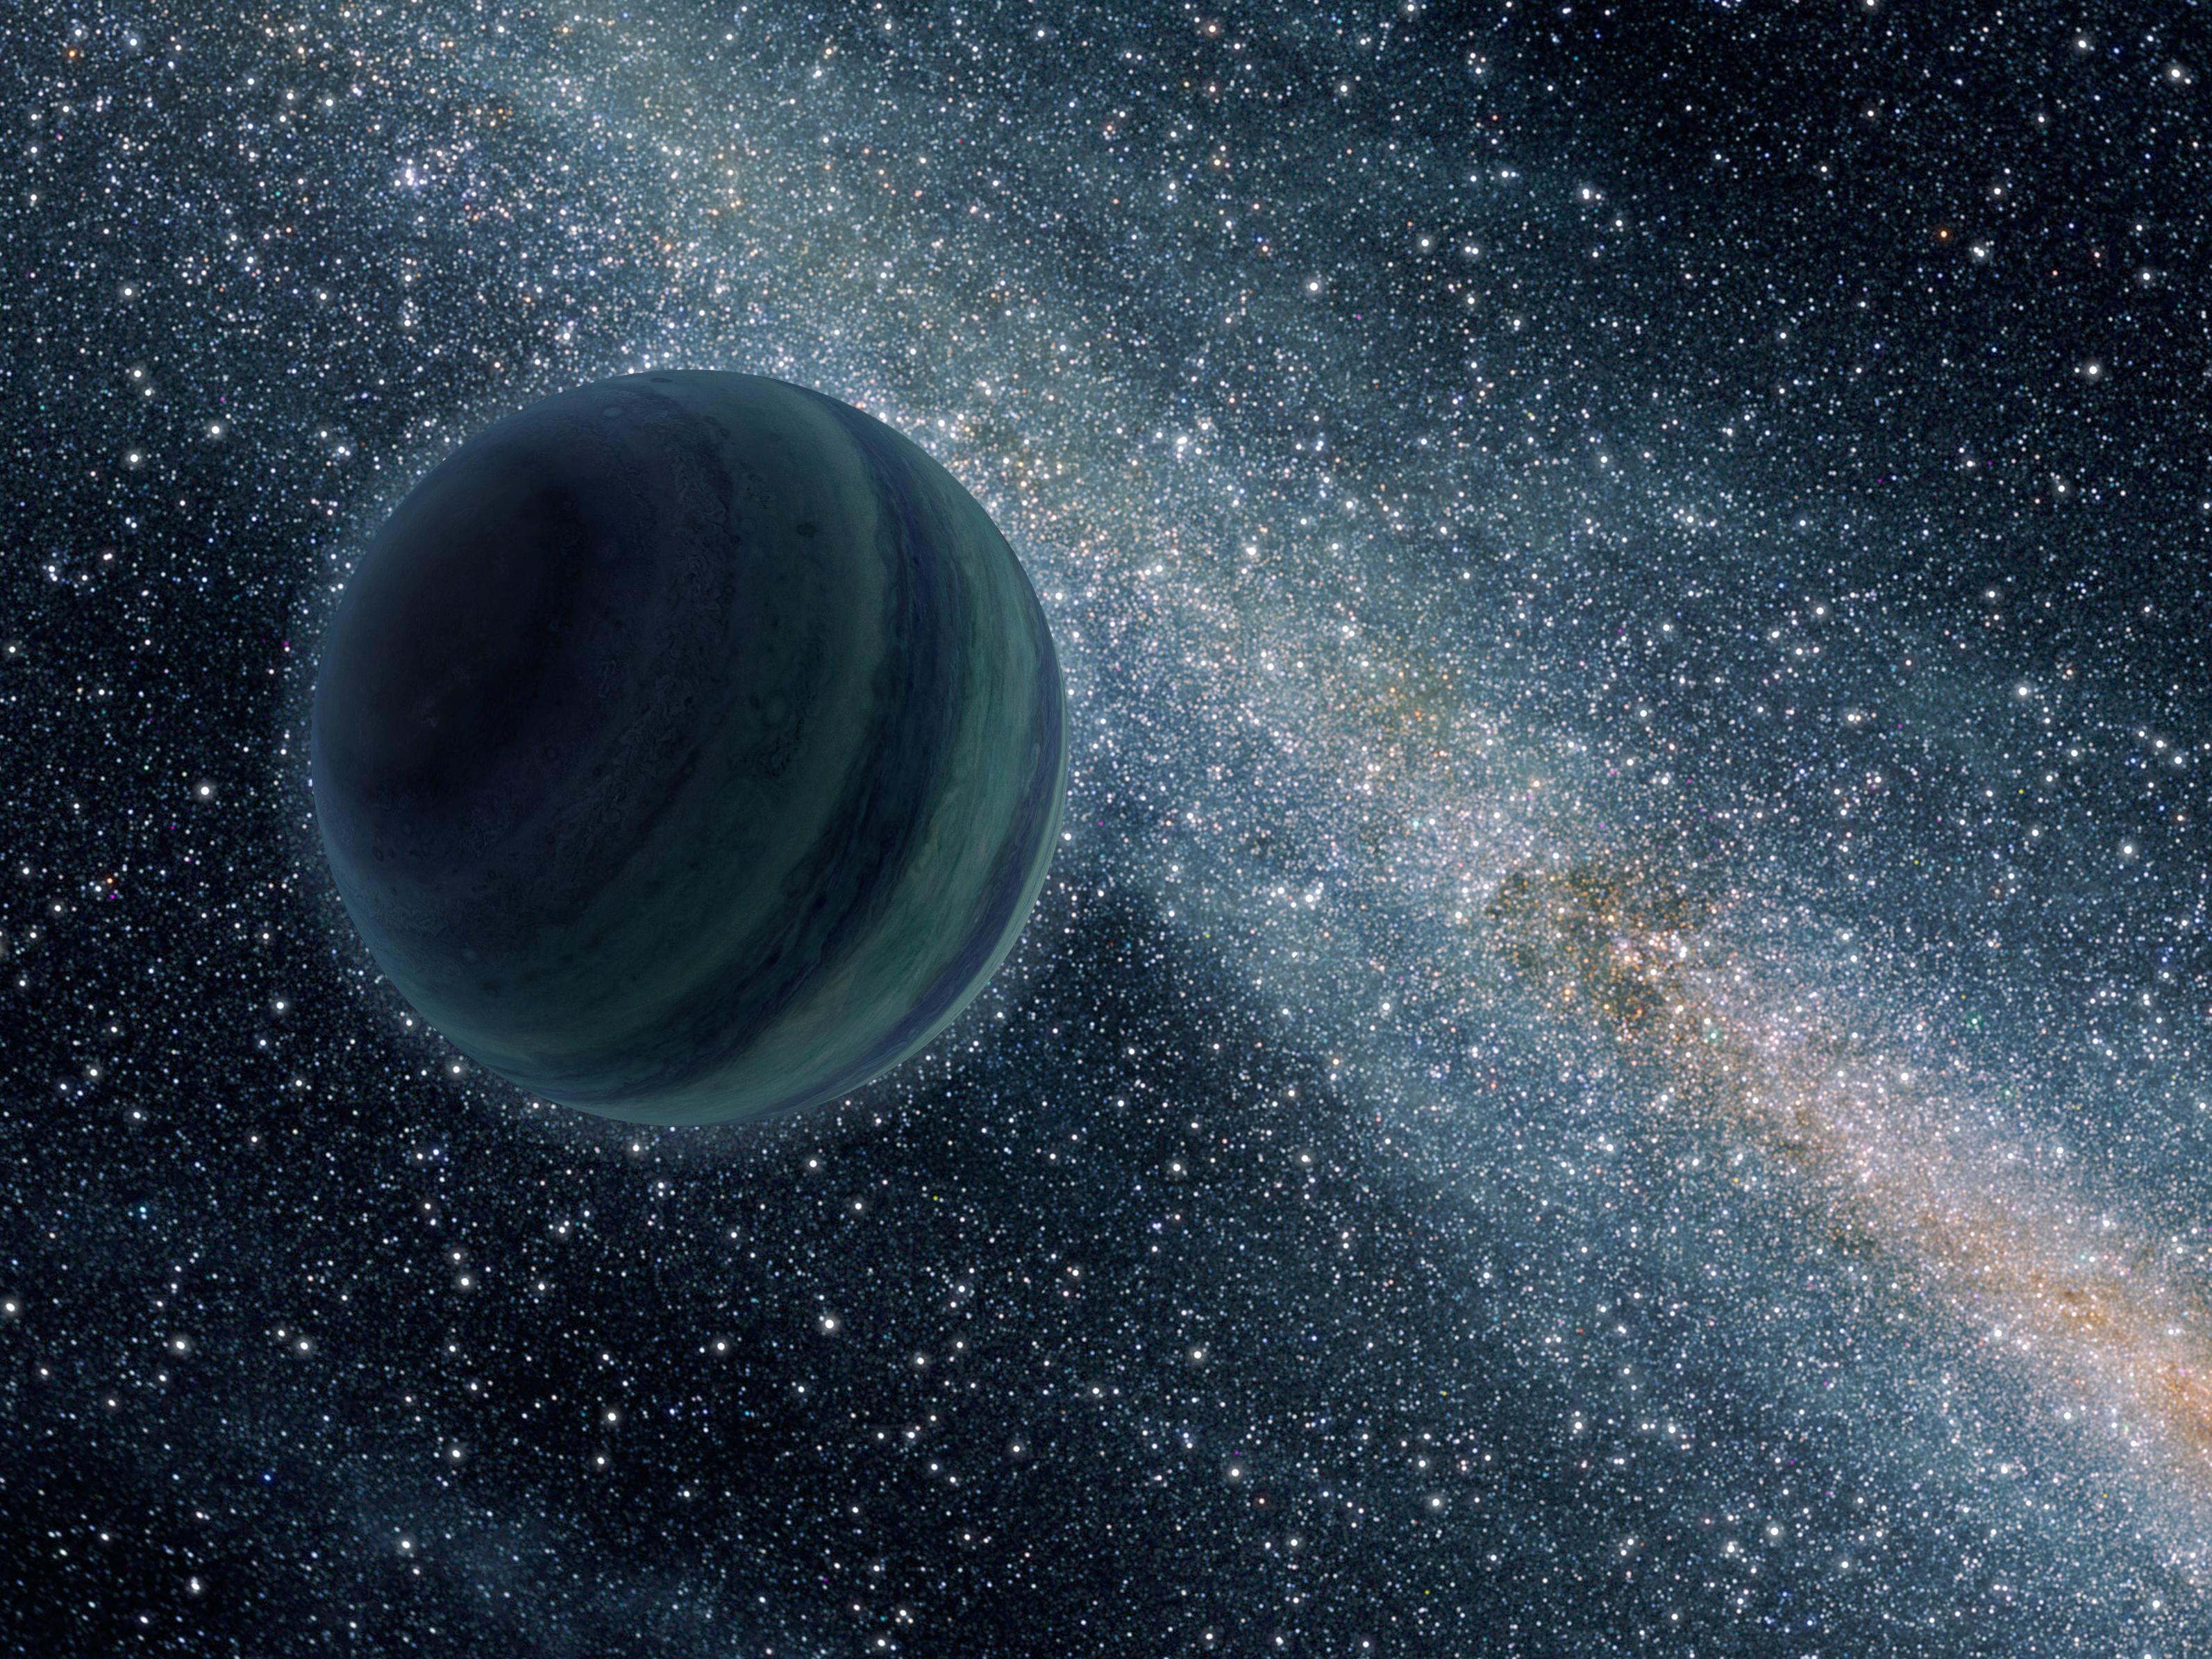 Alone in Space - Astronomers Find New Kind of Planet